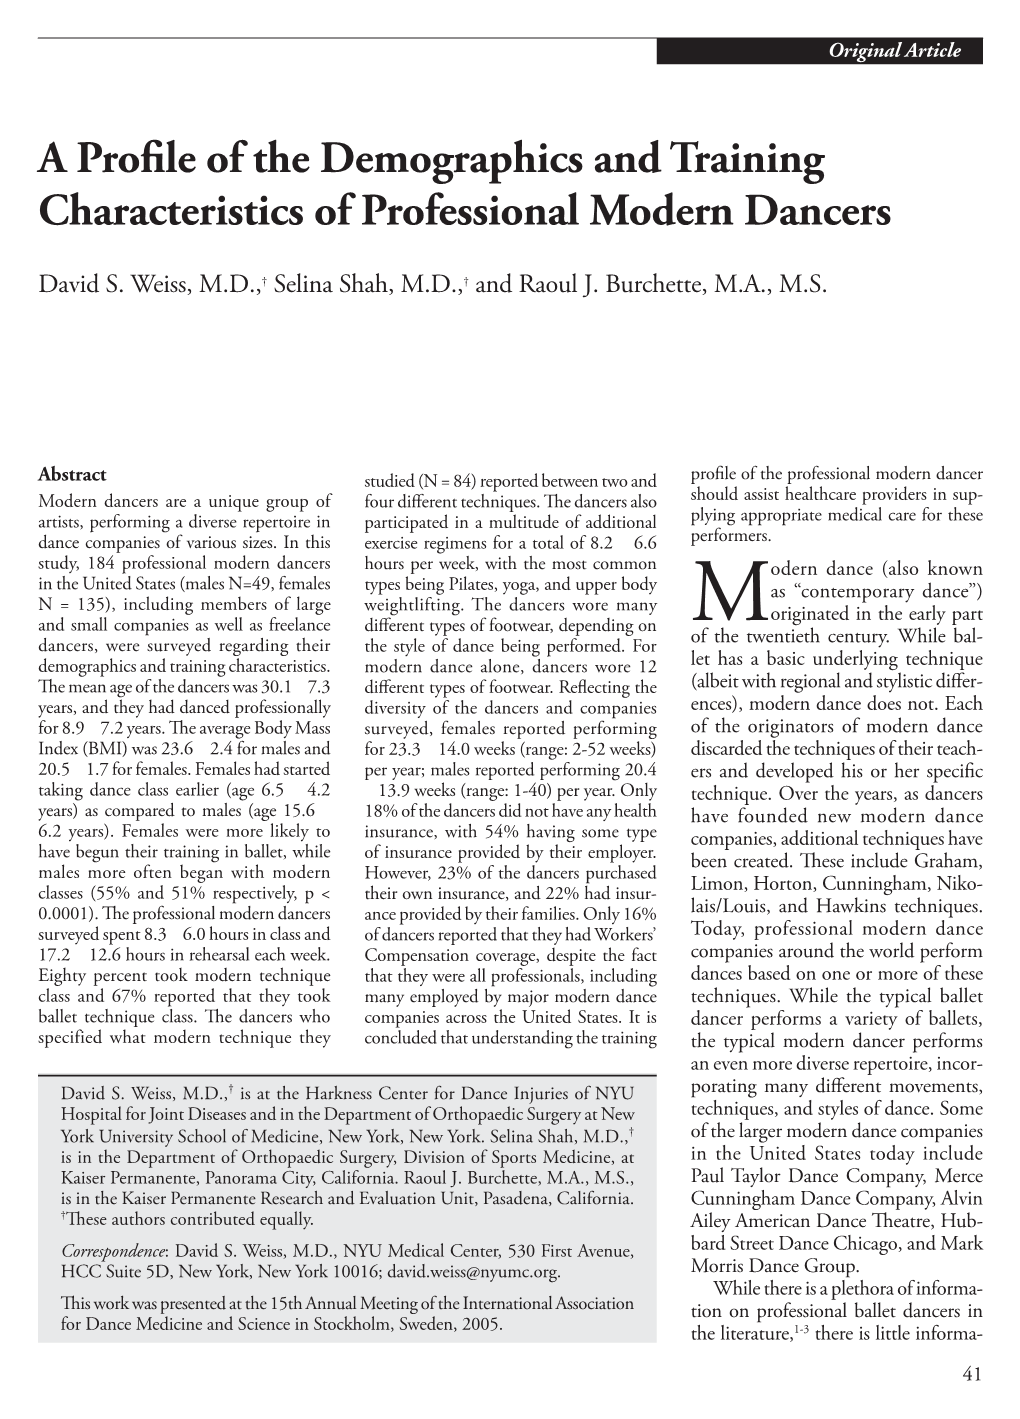 A Profile of the Demographics and Training Characteristics of Professional Modern Dancers